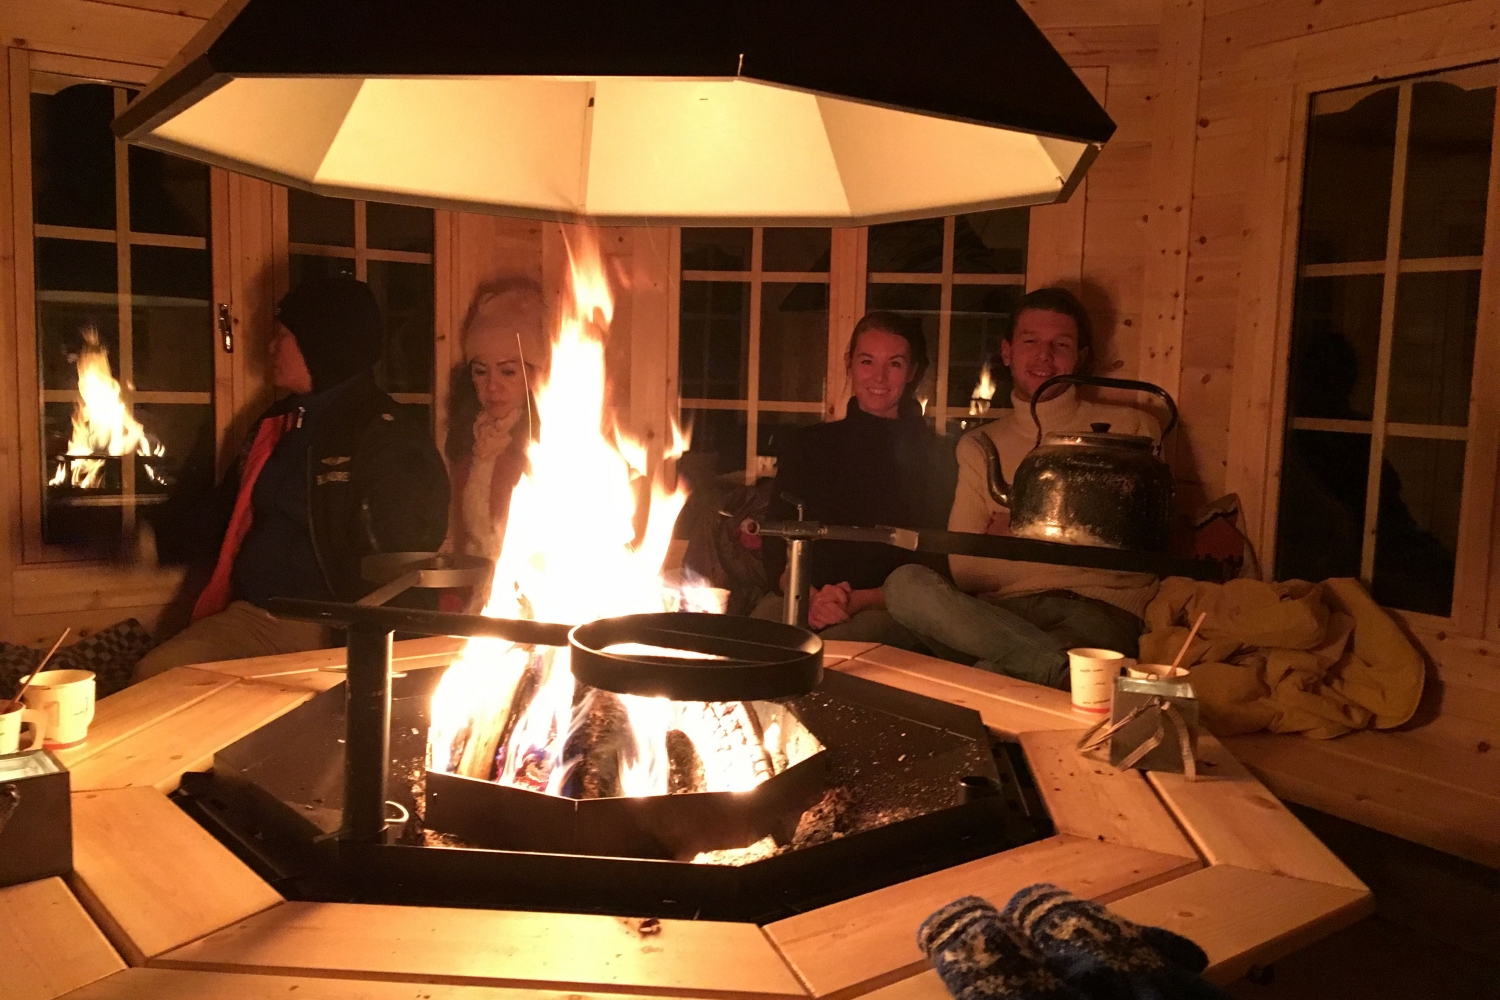 Persons sitting inside a hut with a bonfire in the middle